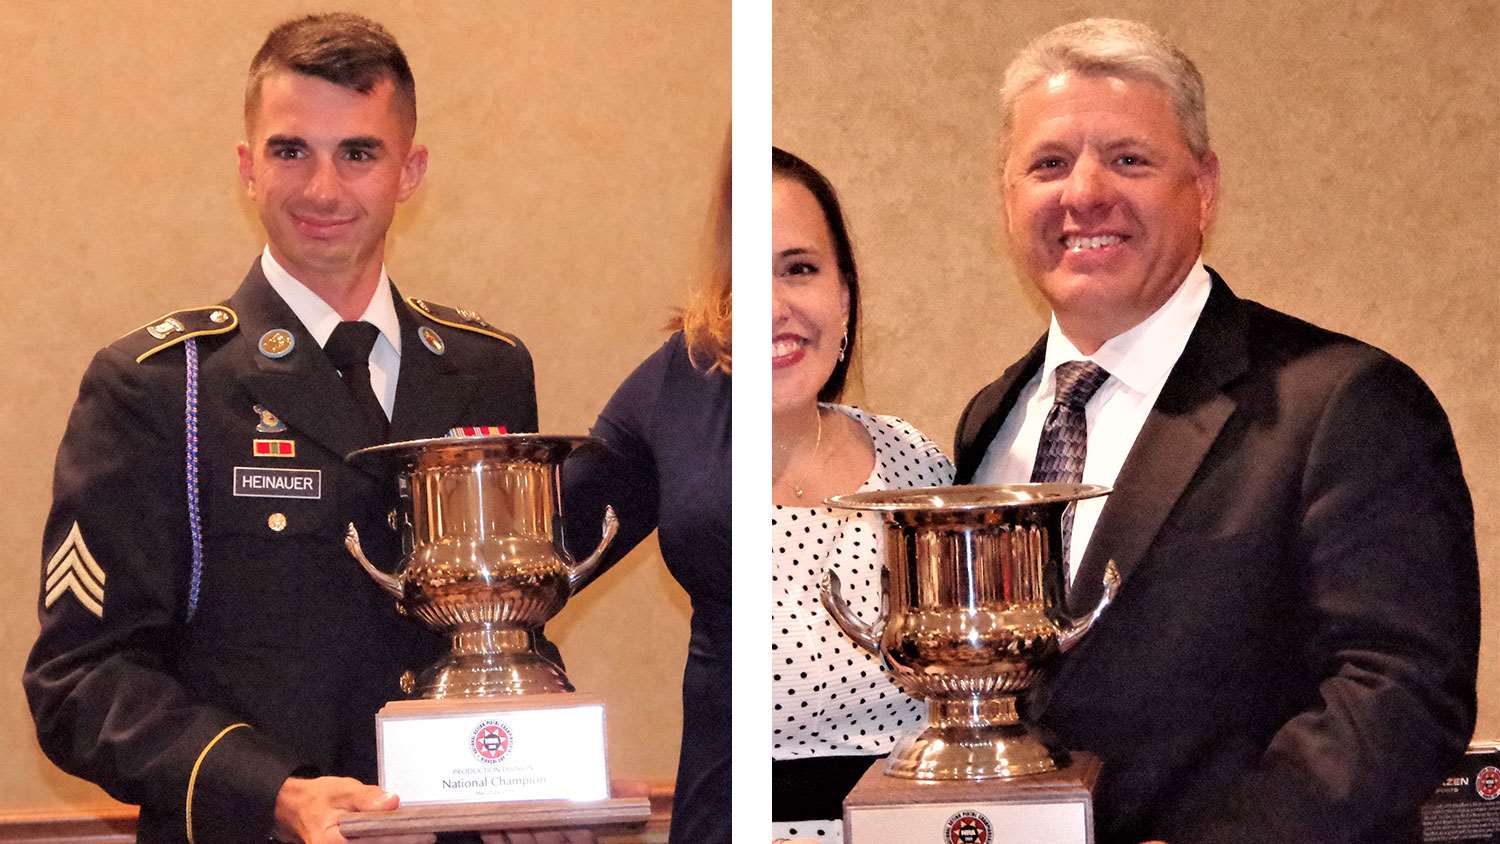 Kyle Schmidt and Sgt. Anthony Heinauer at 2019 Bianchi Cup